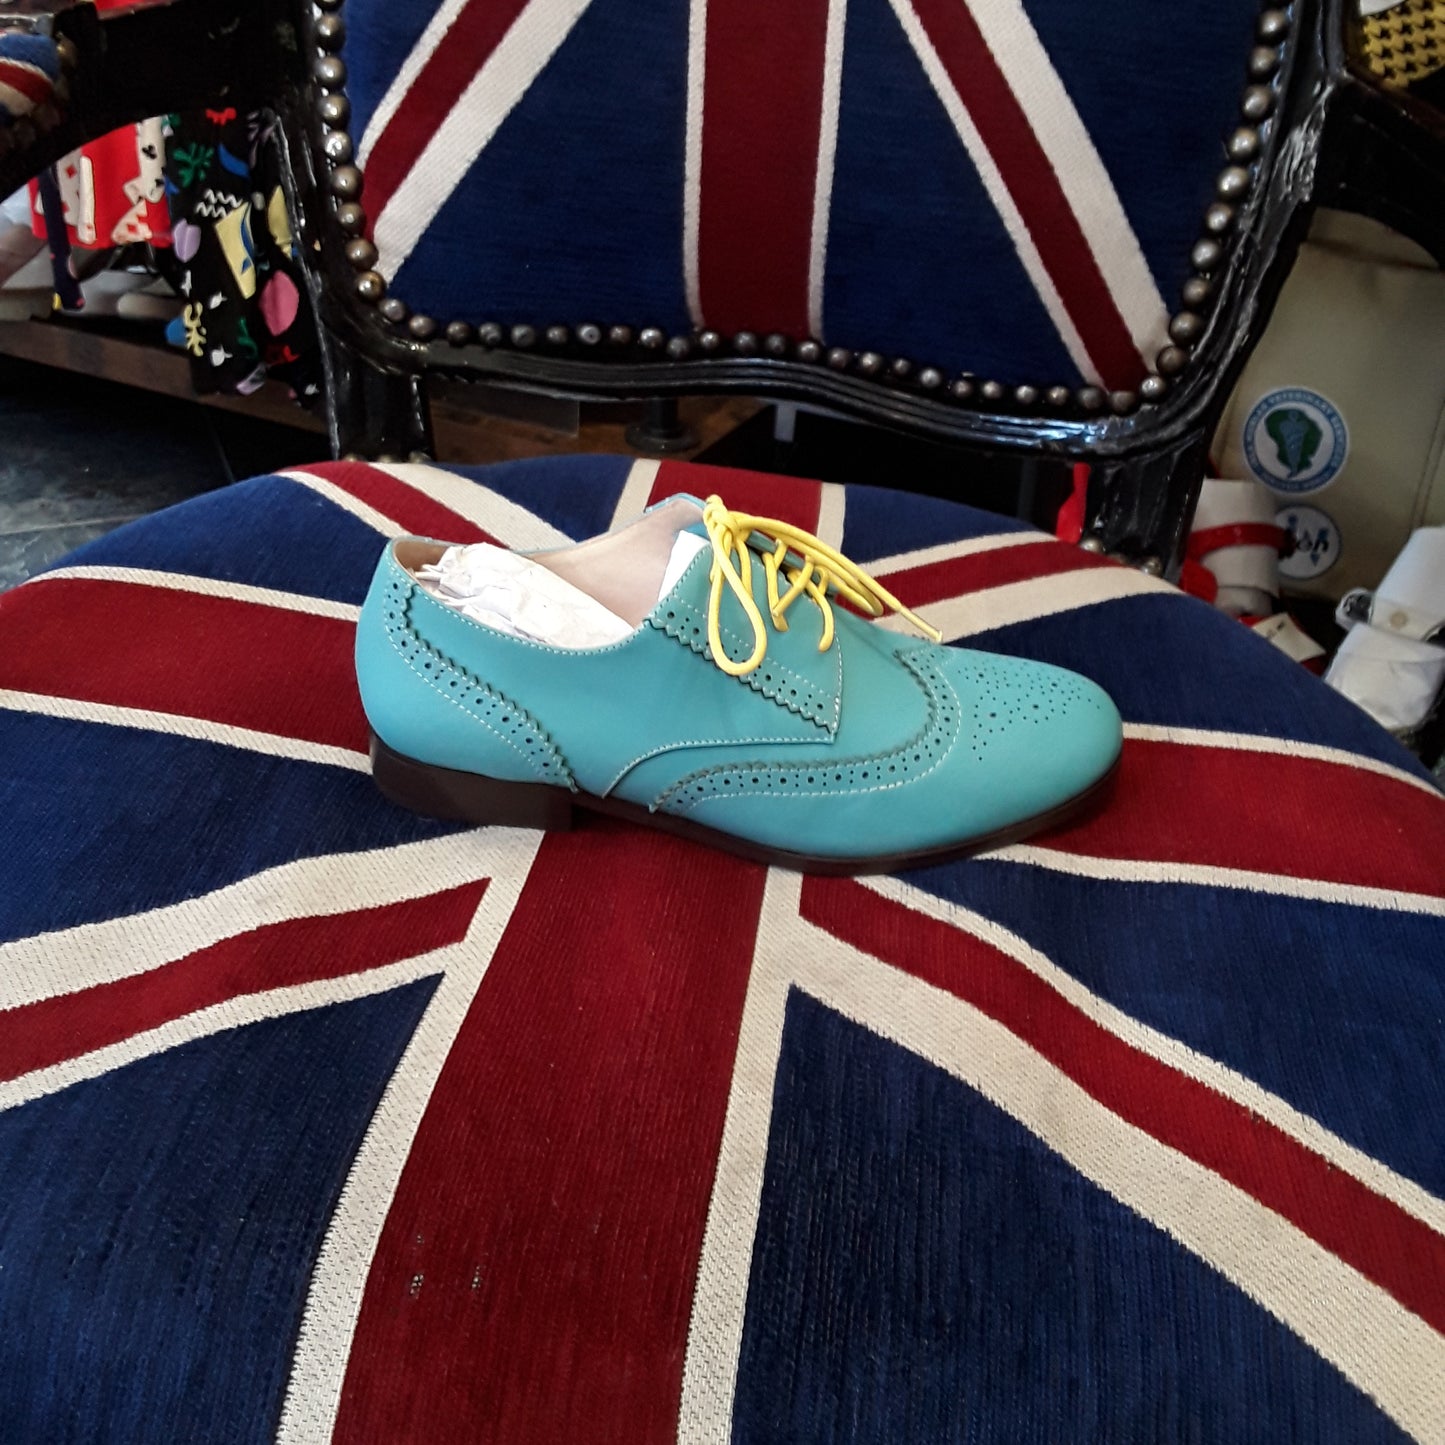 Yull bubblegum brouges size 4,8 now £55 small fitting sale